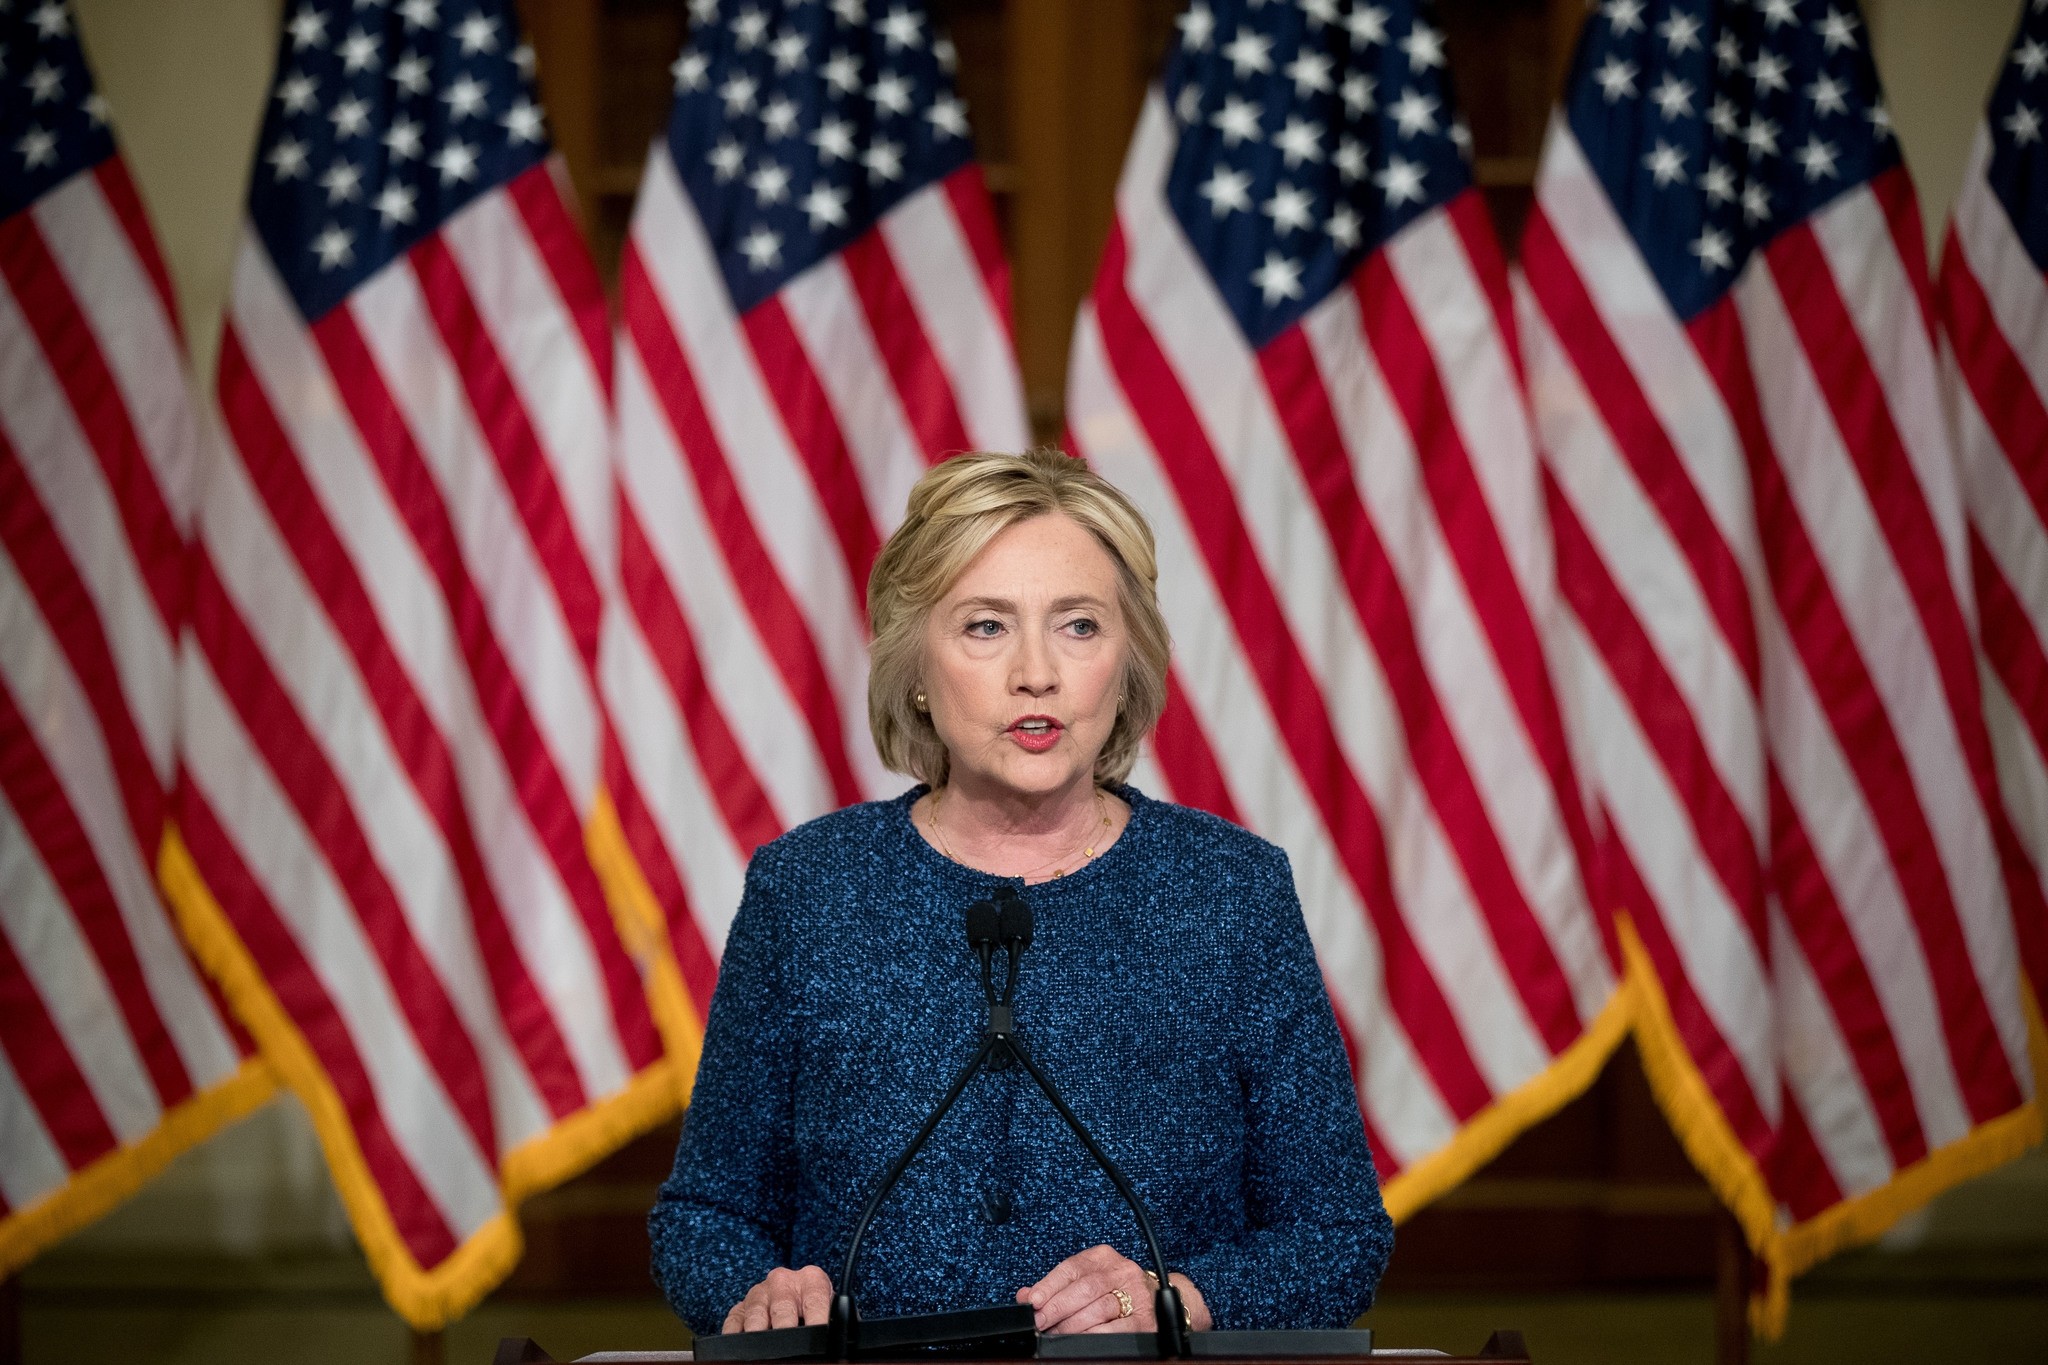 Hillary Clinton gives a statement after attending a National Security working session at the Historical Society Library, in New York, Sept. 9, 2016. (AP Photo)